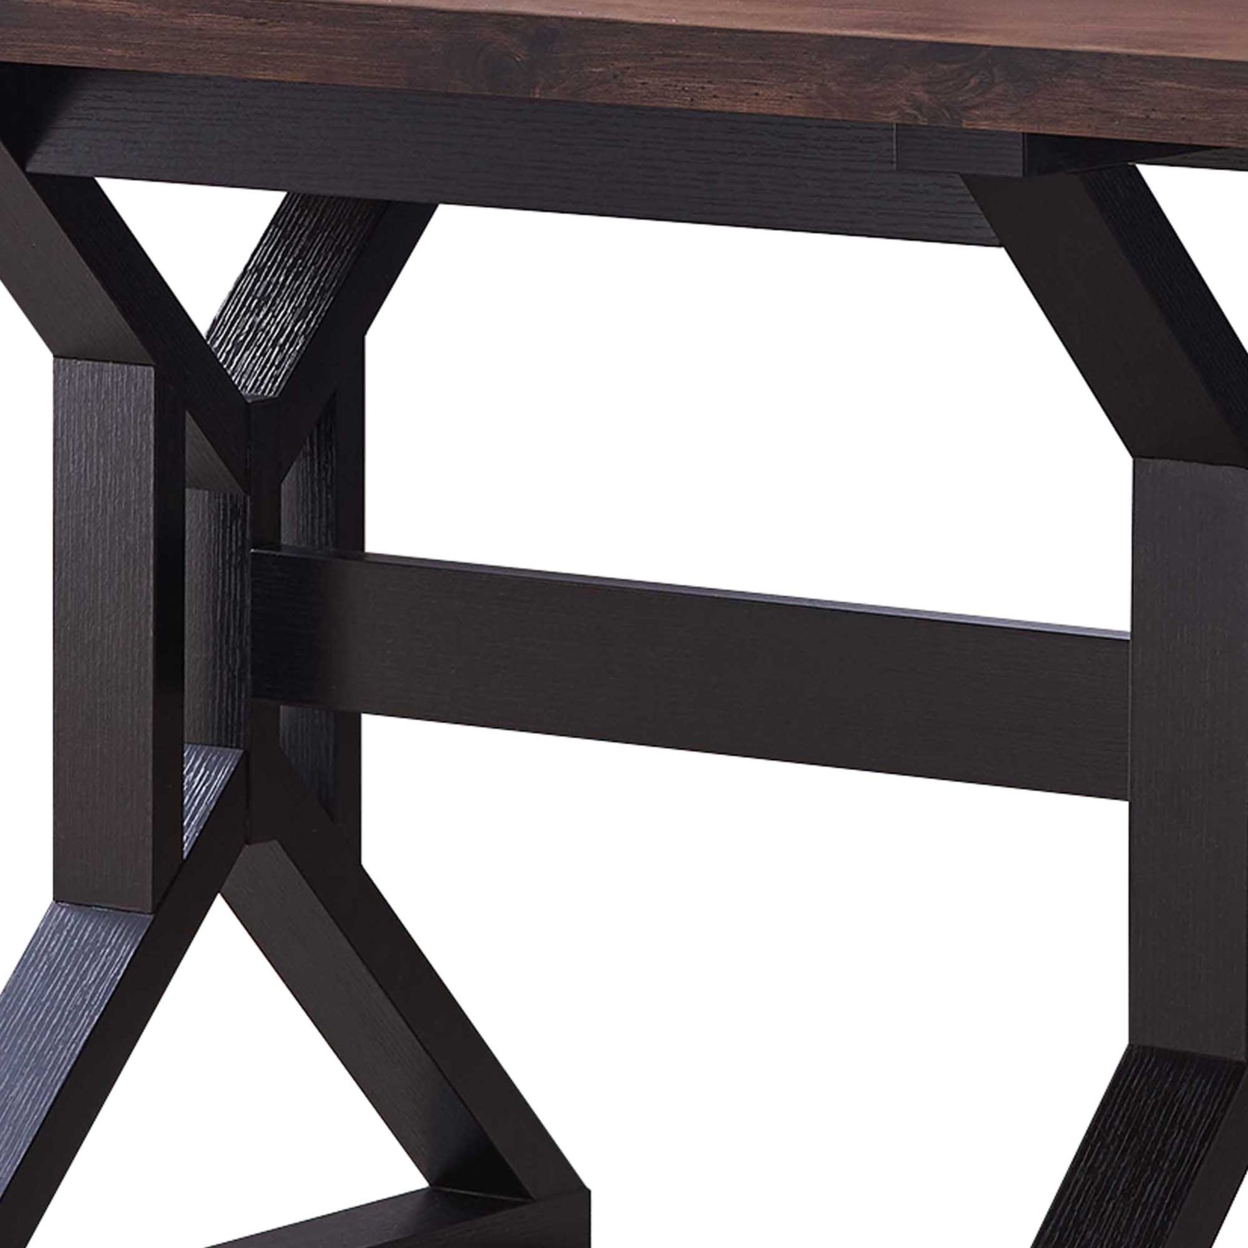 Two Toned Rectangular Wooden Dining Table With X Shaped Trestle Base, Black And Brown- Saltoro Sherpi